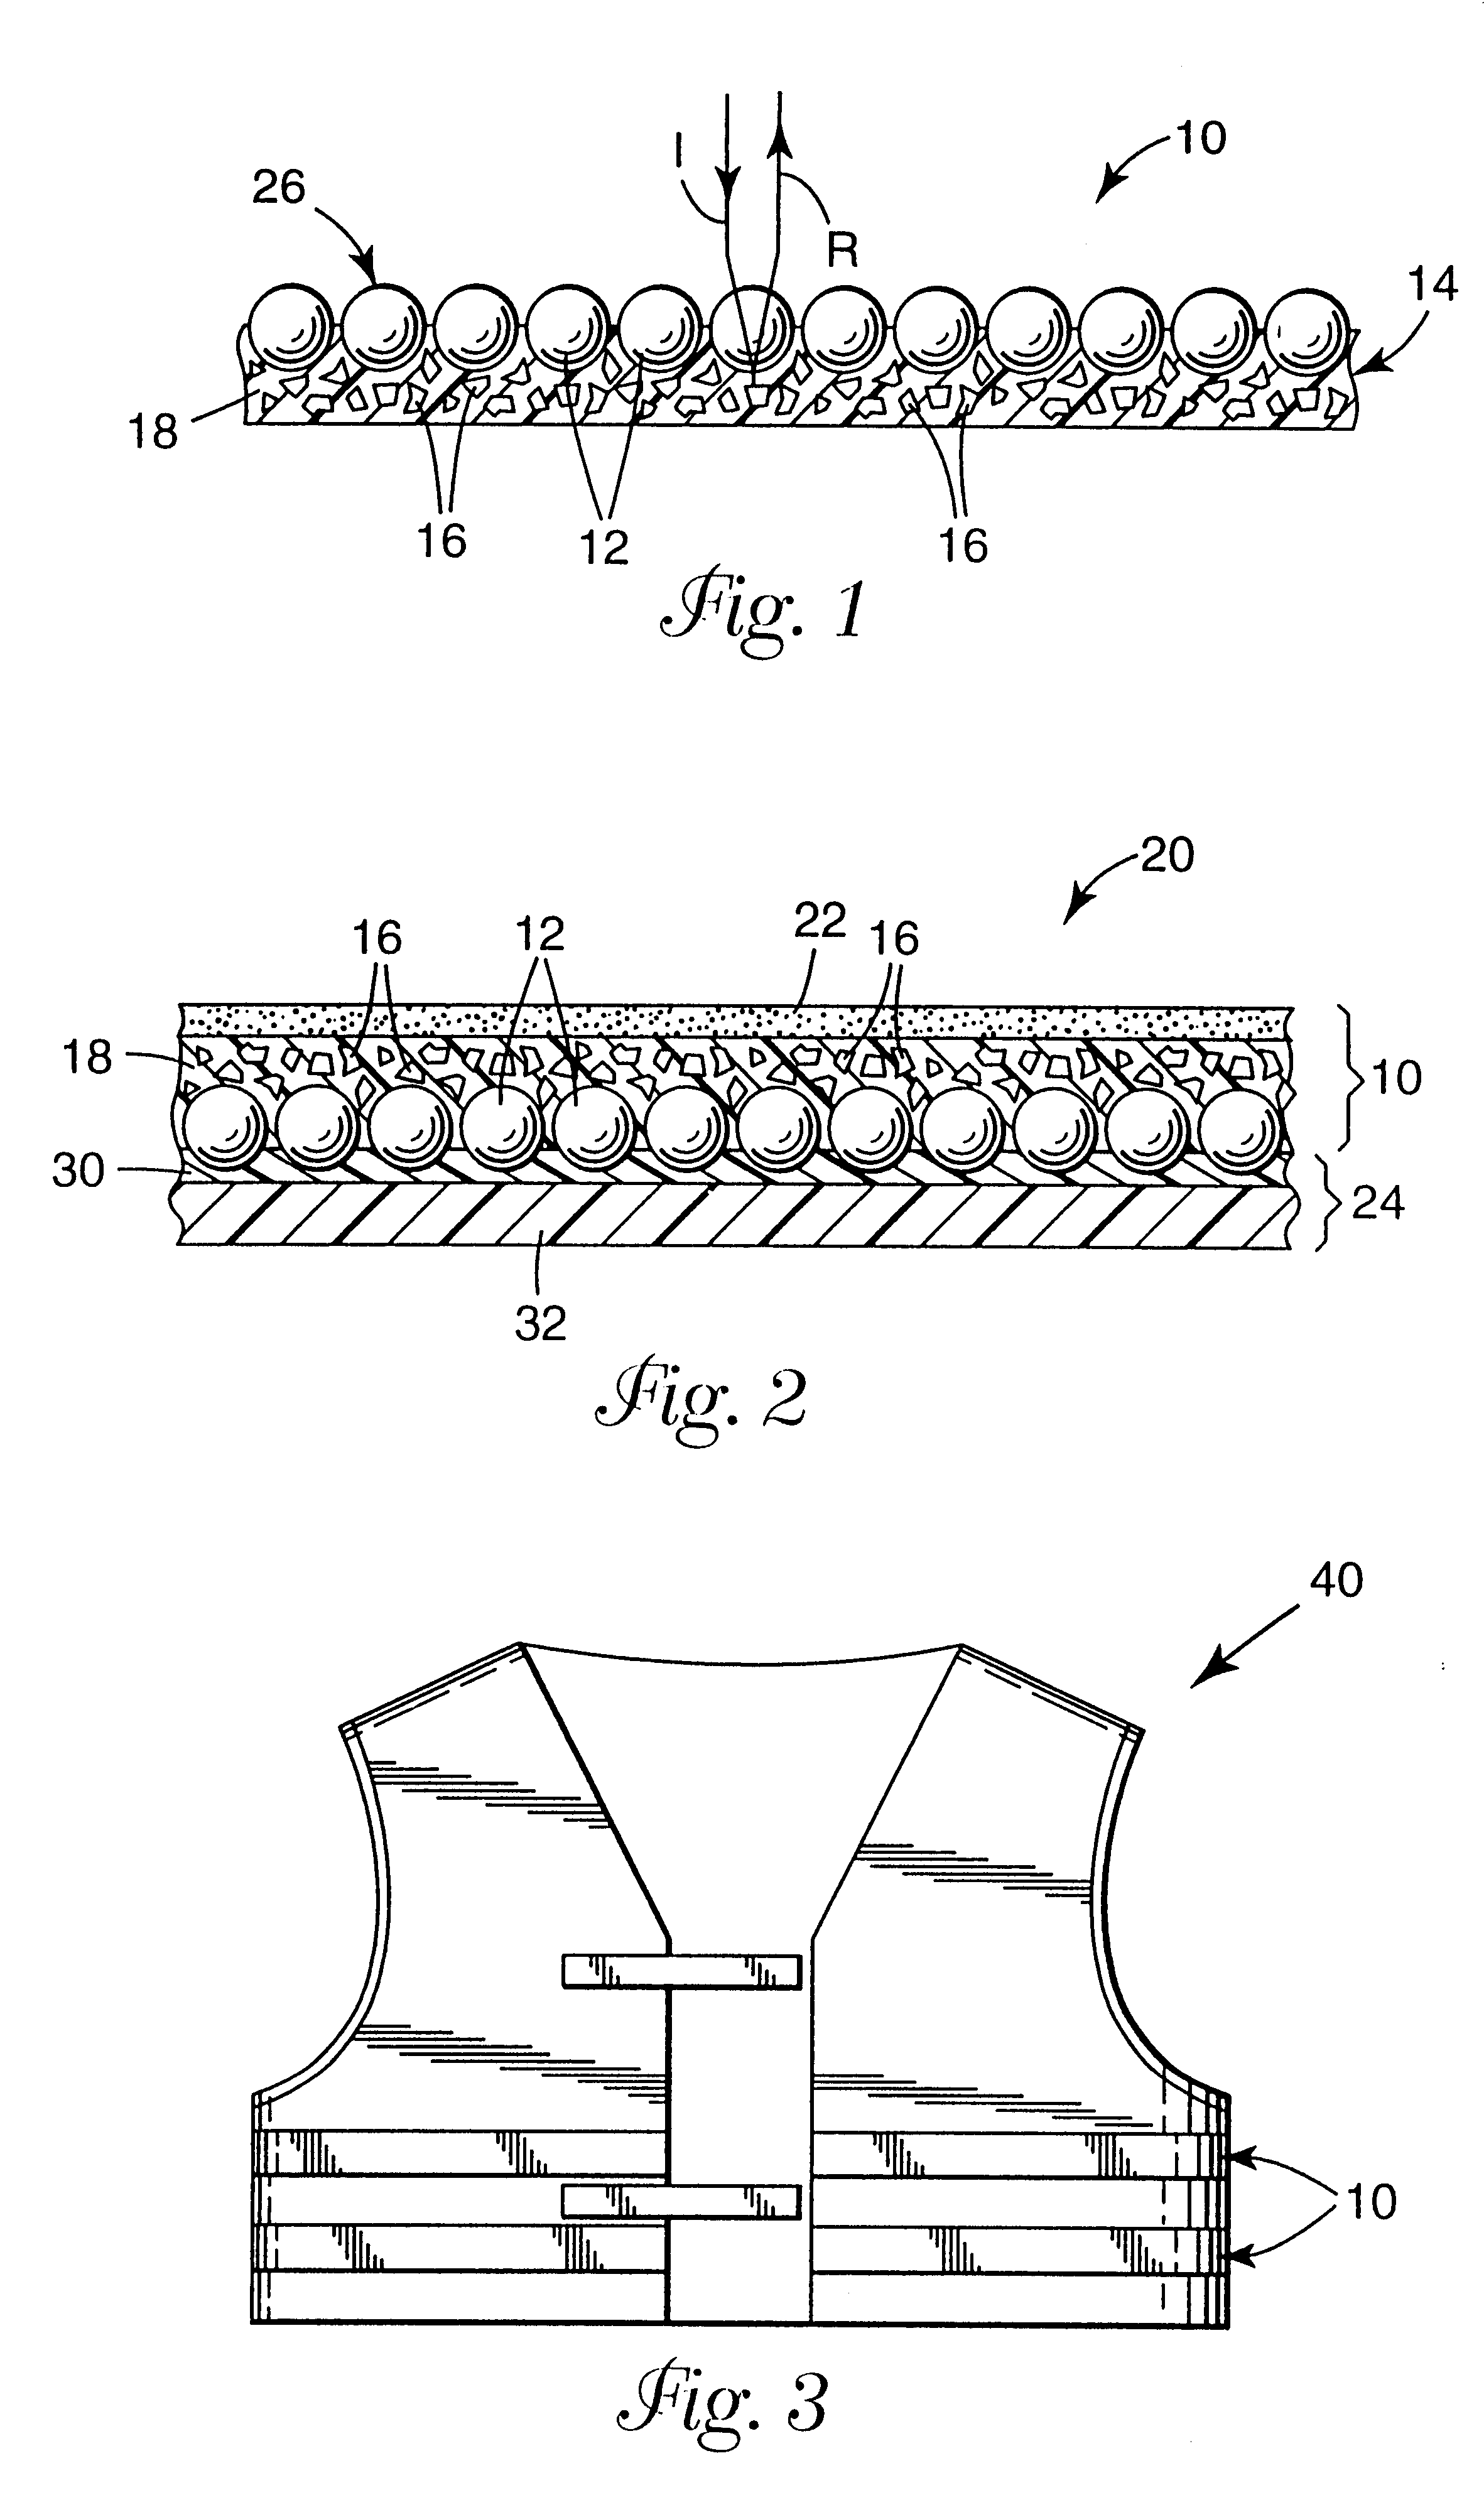 Retroflective article having a colored layer containing reflective flakes and a dye covalently bonded to a polymer